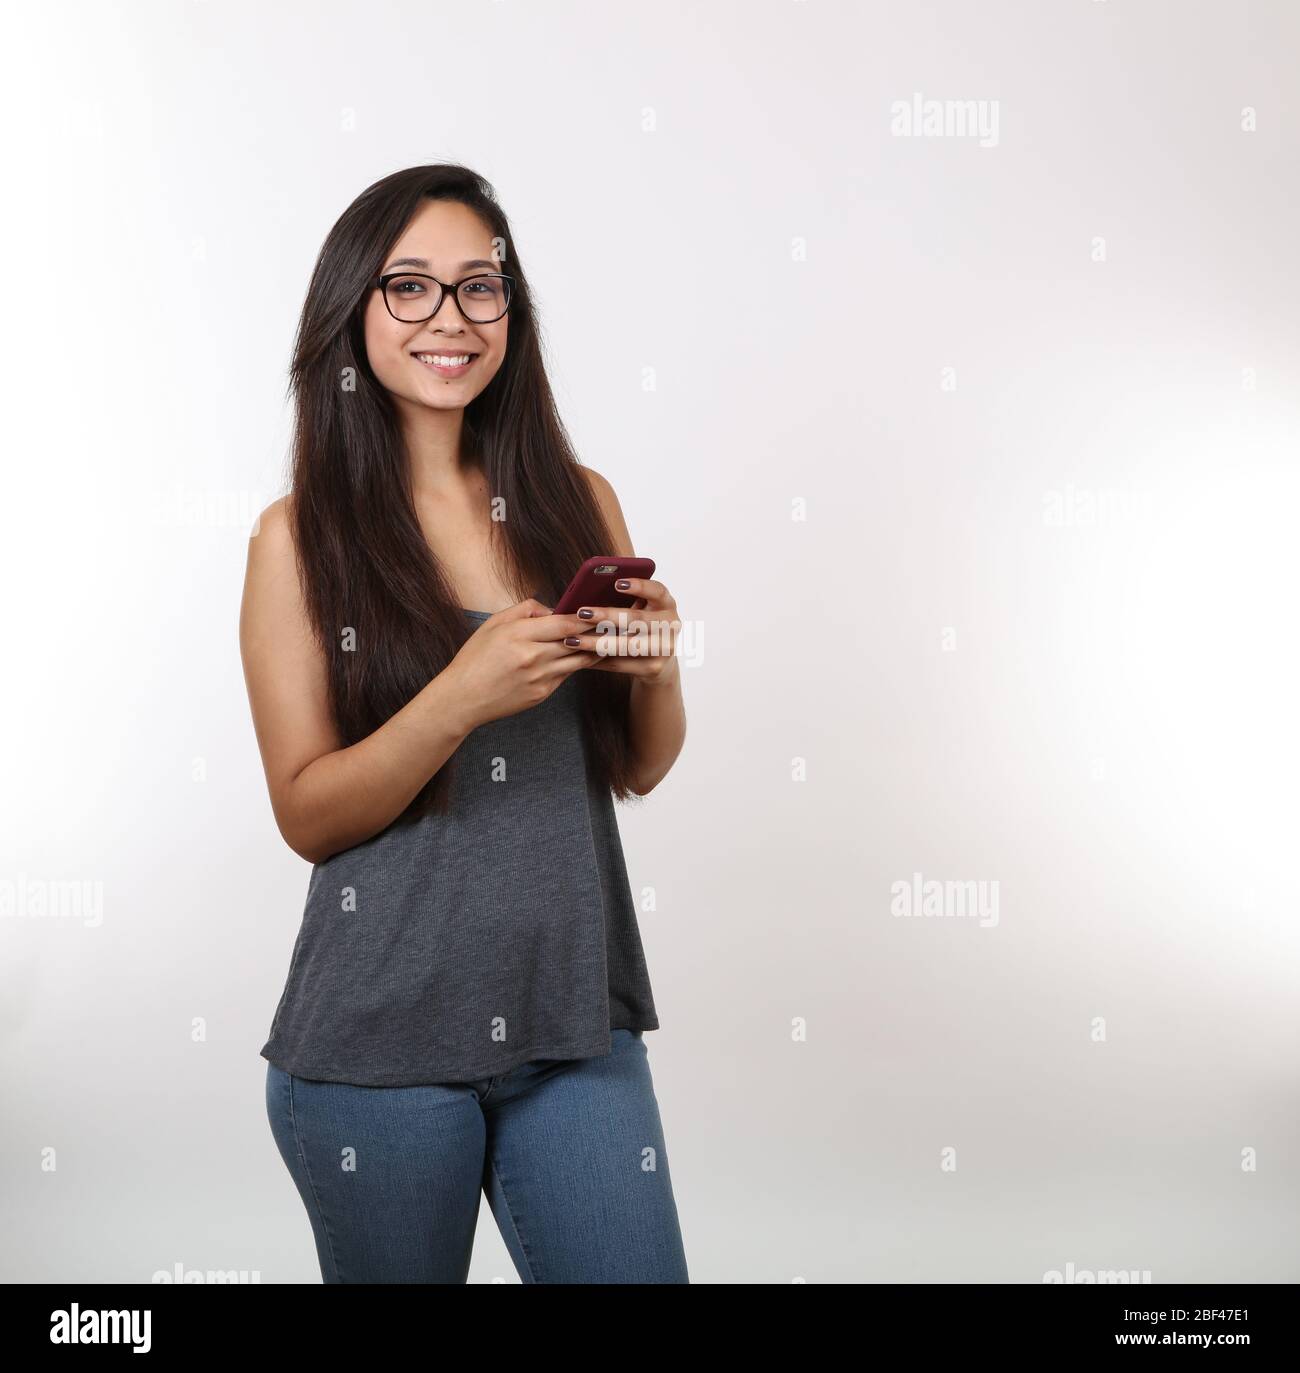 A young lady wearing glasses, blue jeans and a grey tank top holds her phone as she smiles. Stock Photo